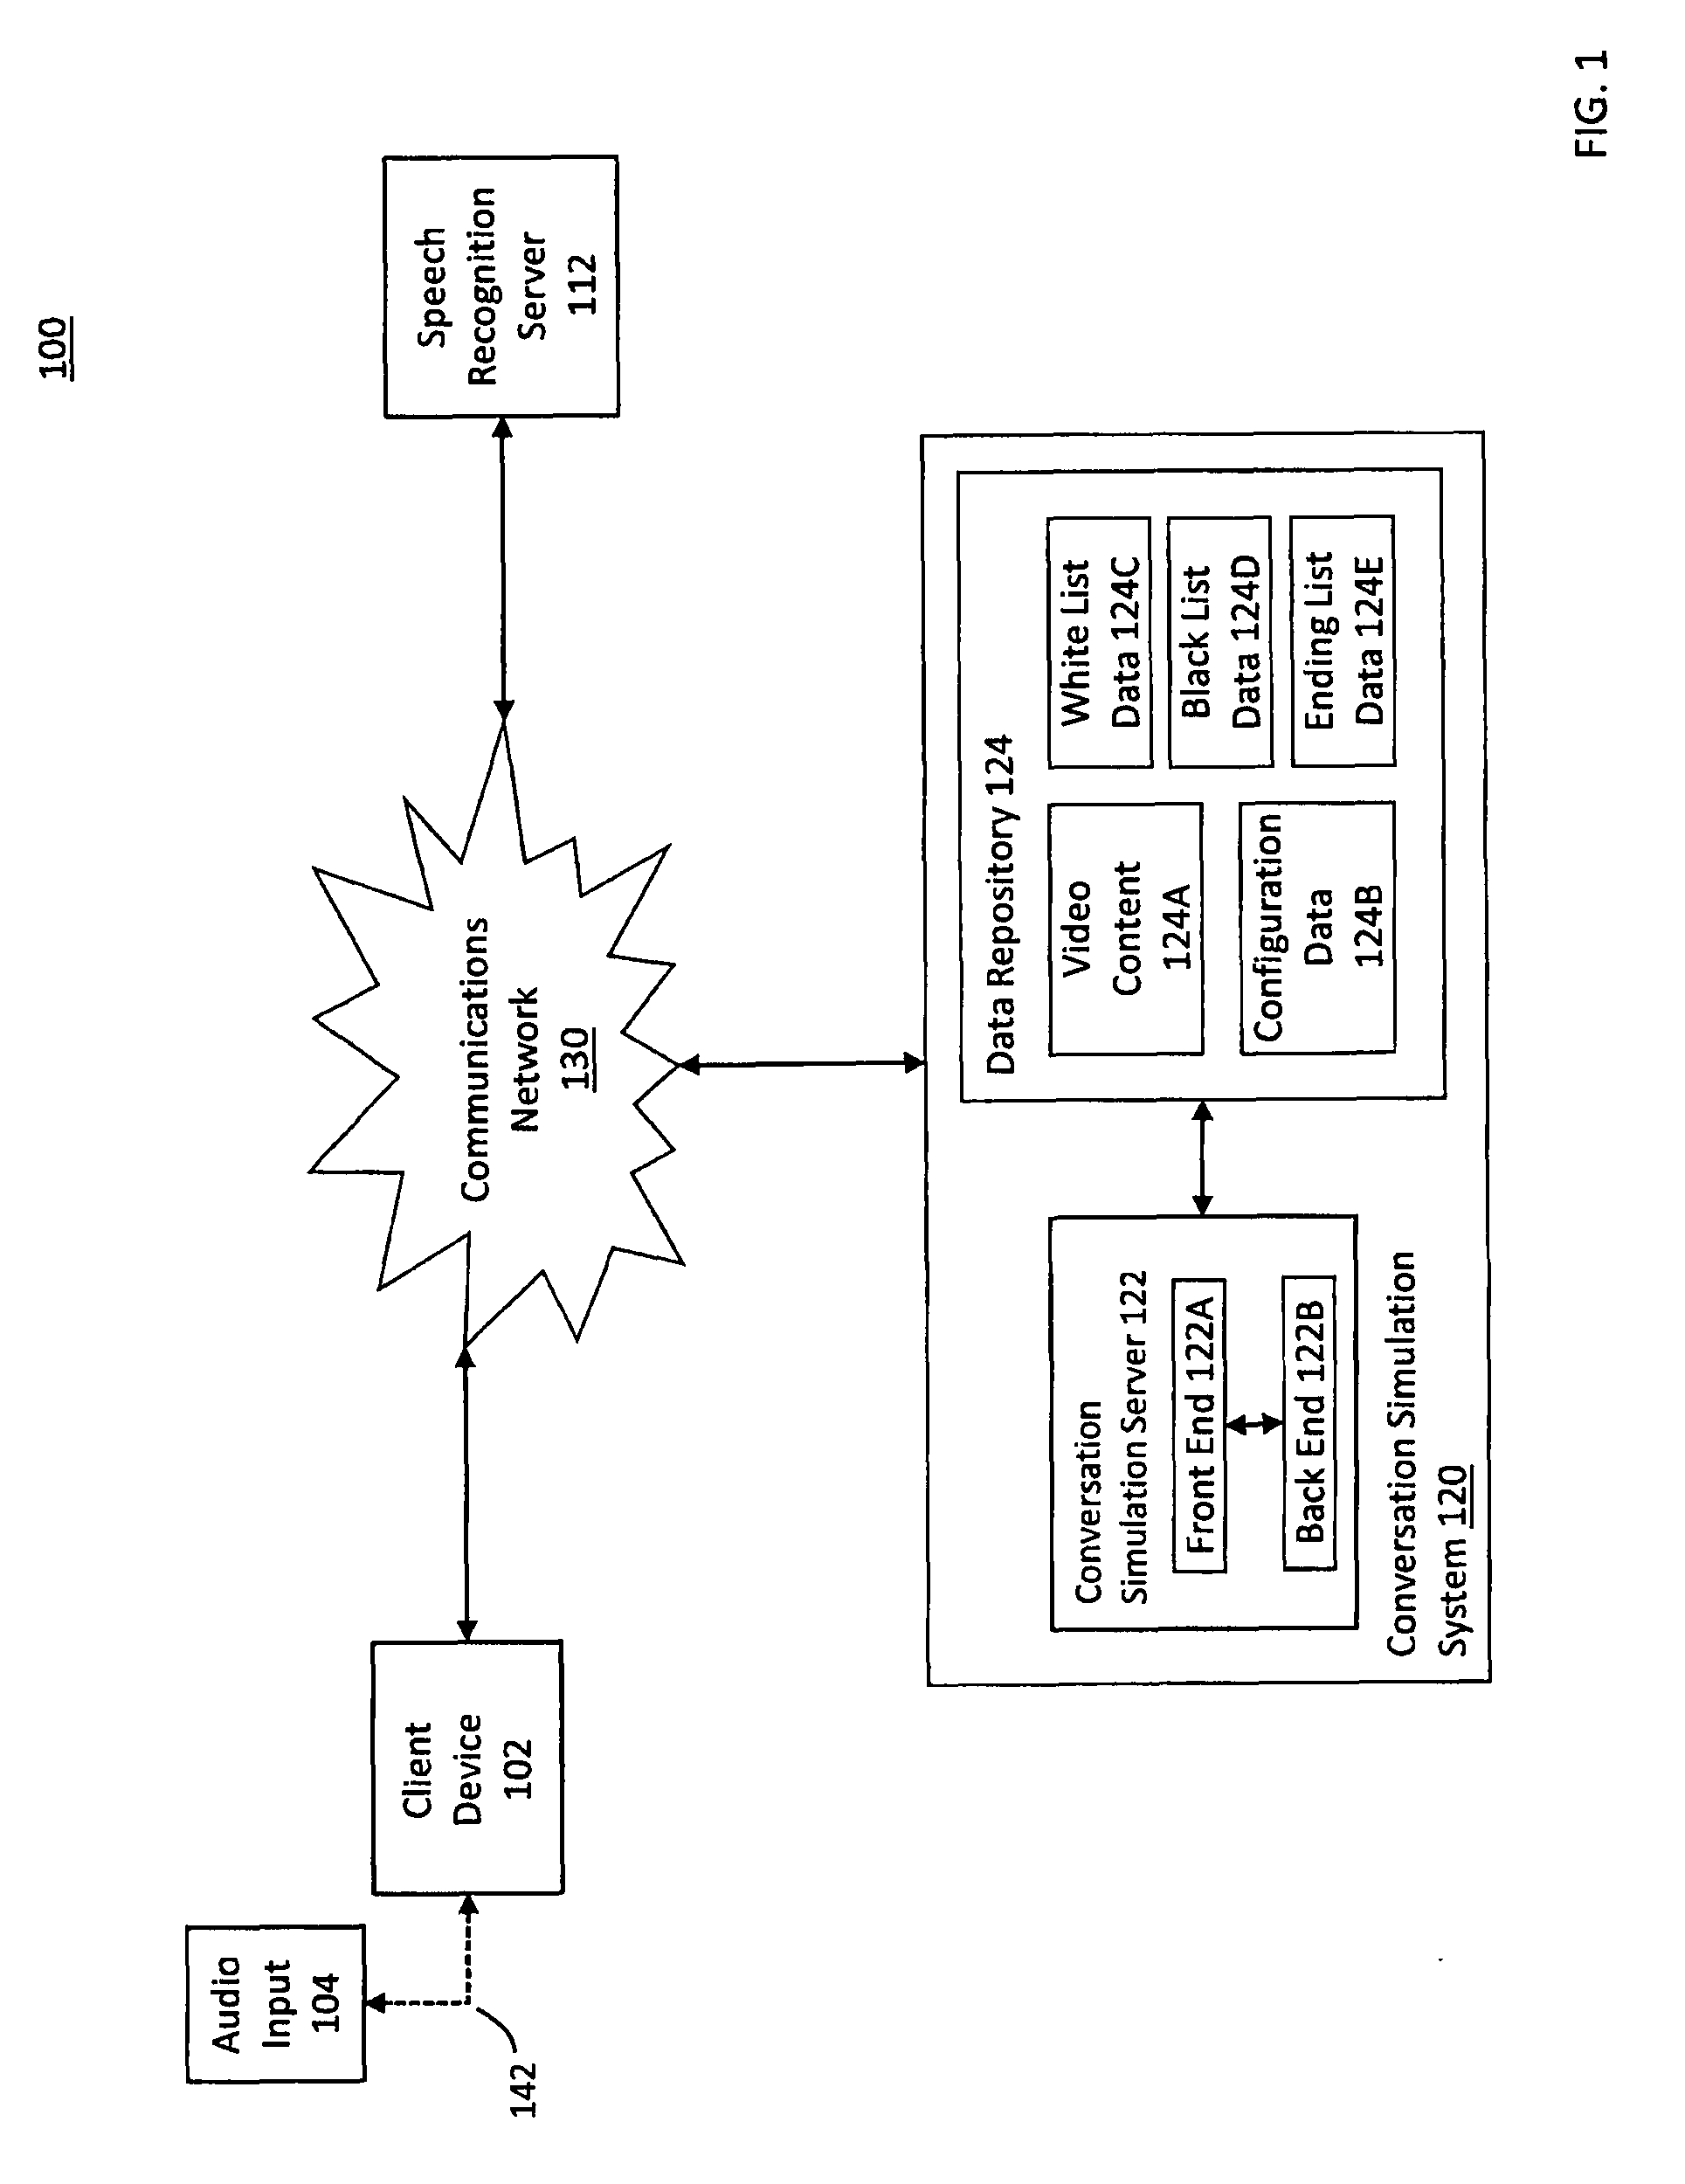 Systems and methods for extracting meaning from speech-to-text data